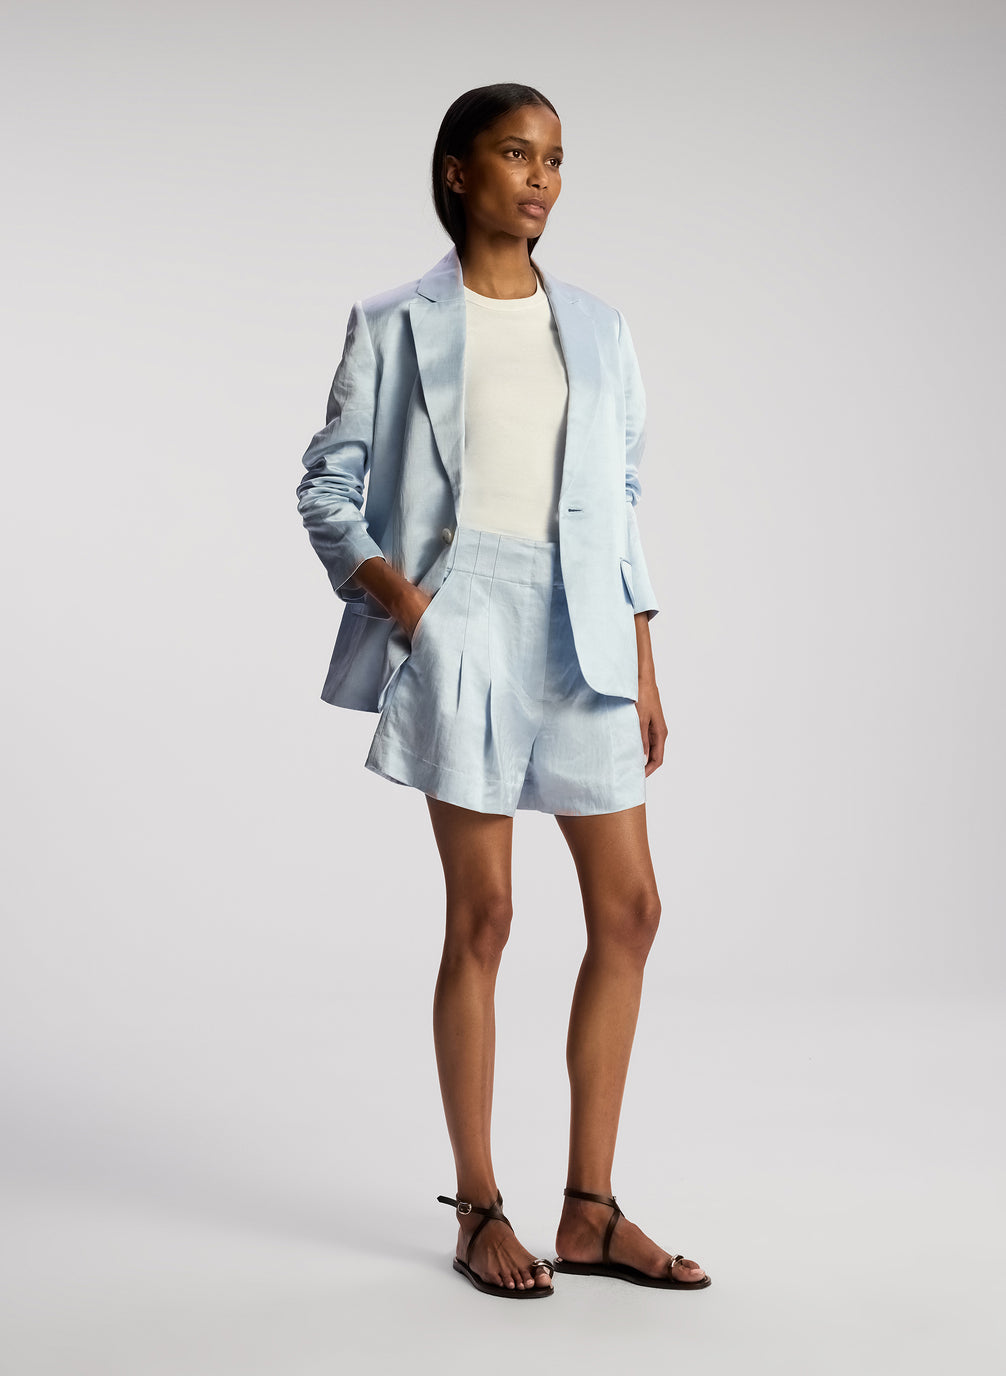 side view of woman wearing light blue blazer with matching shorts